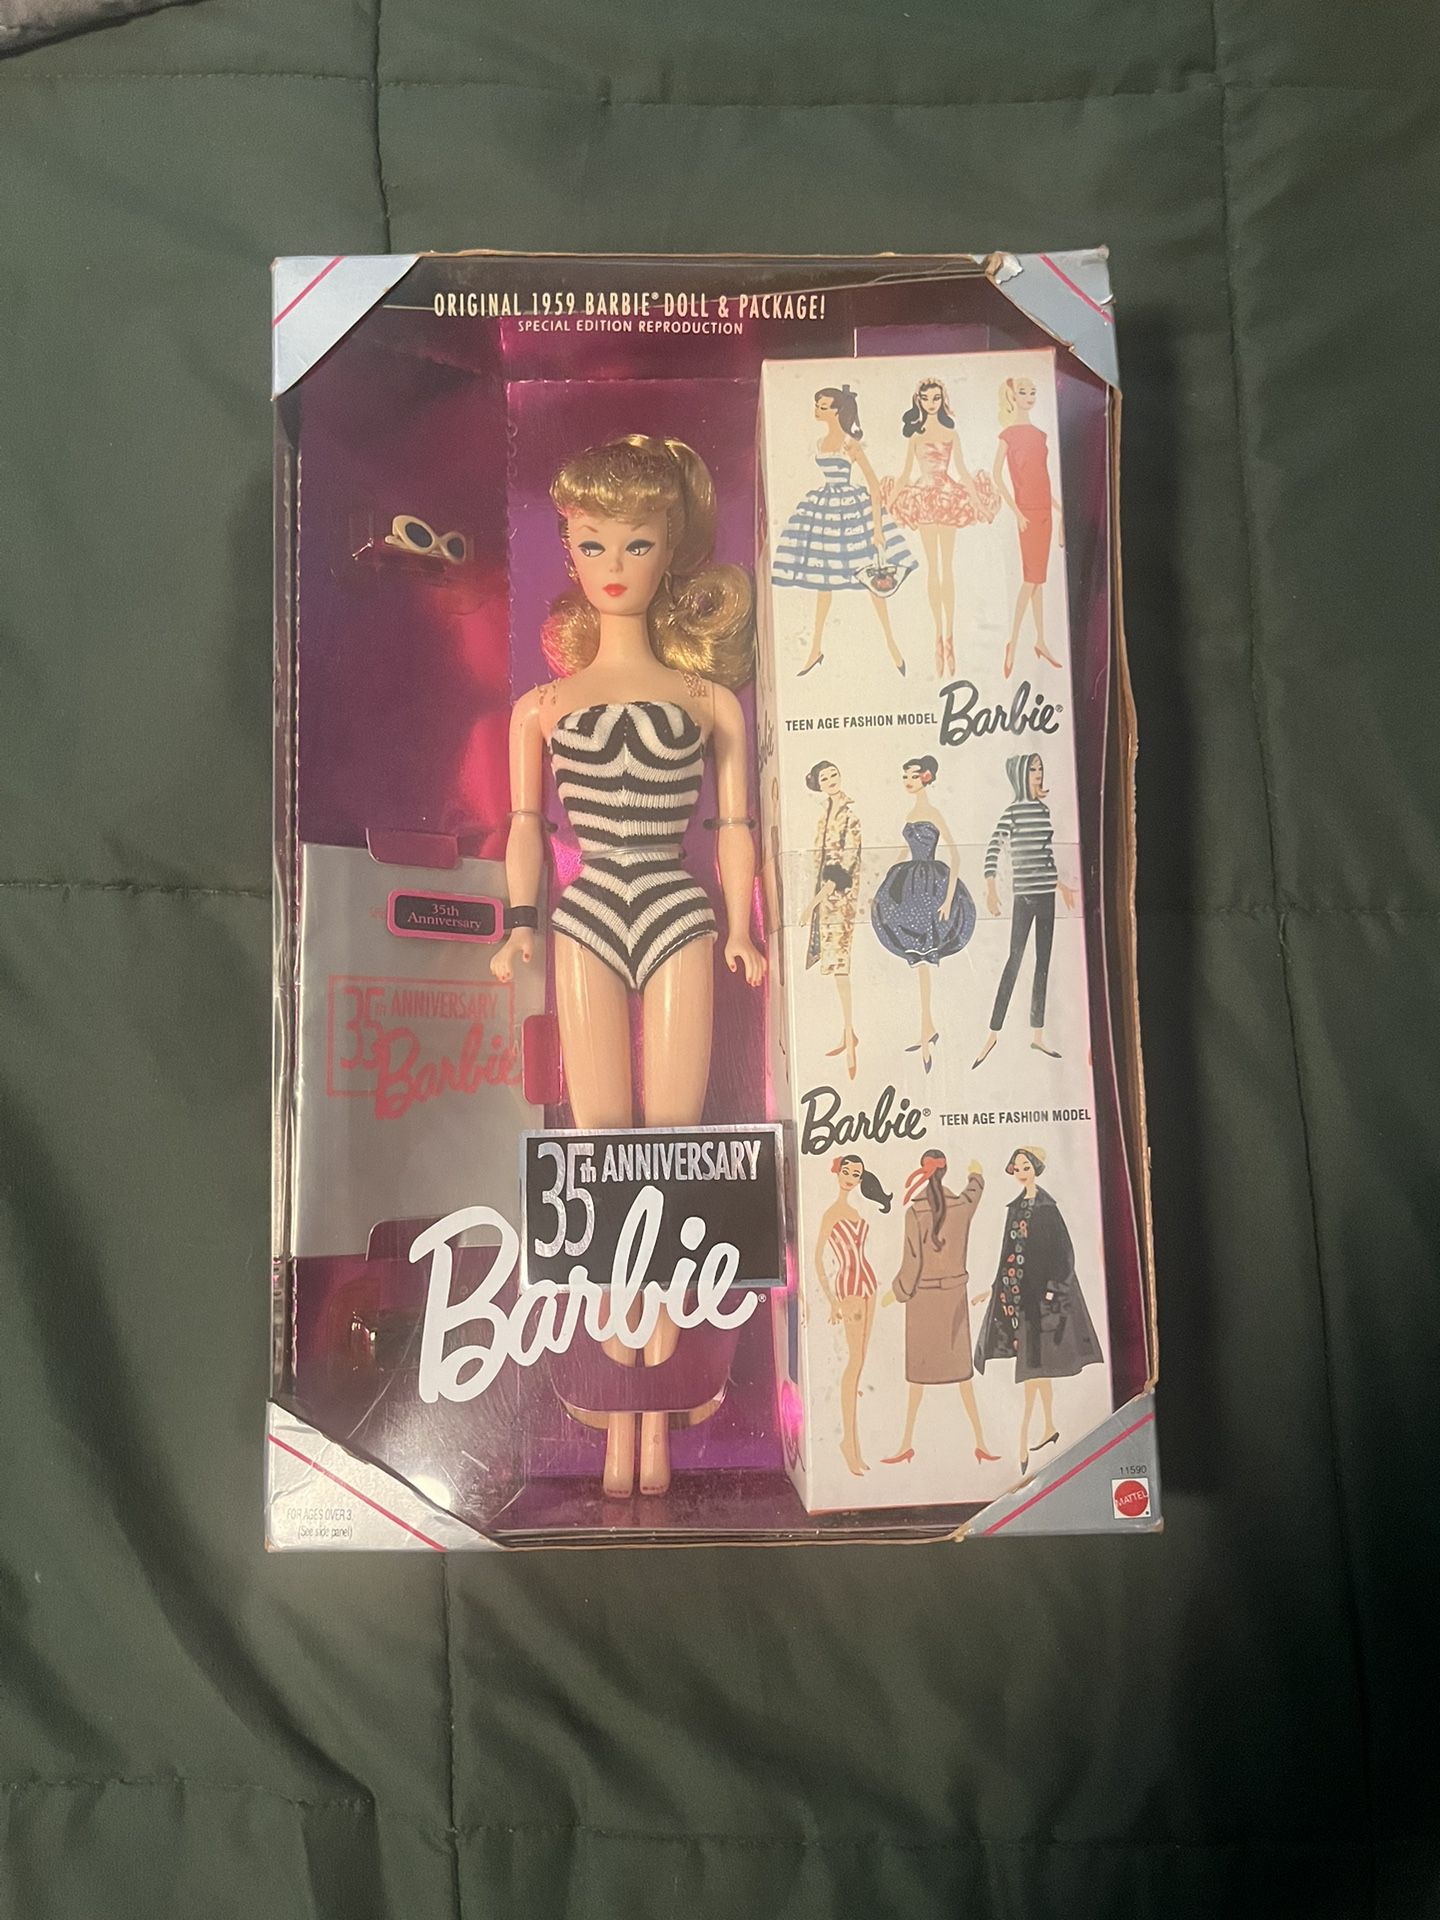 Barbie 1959 Barbie Doll 35th Anniversary Special Edition 1993 Mattel